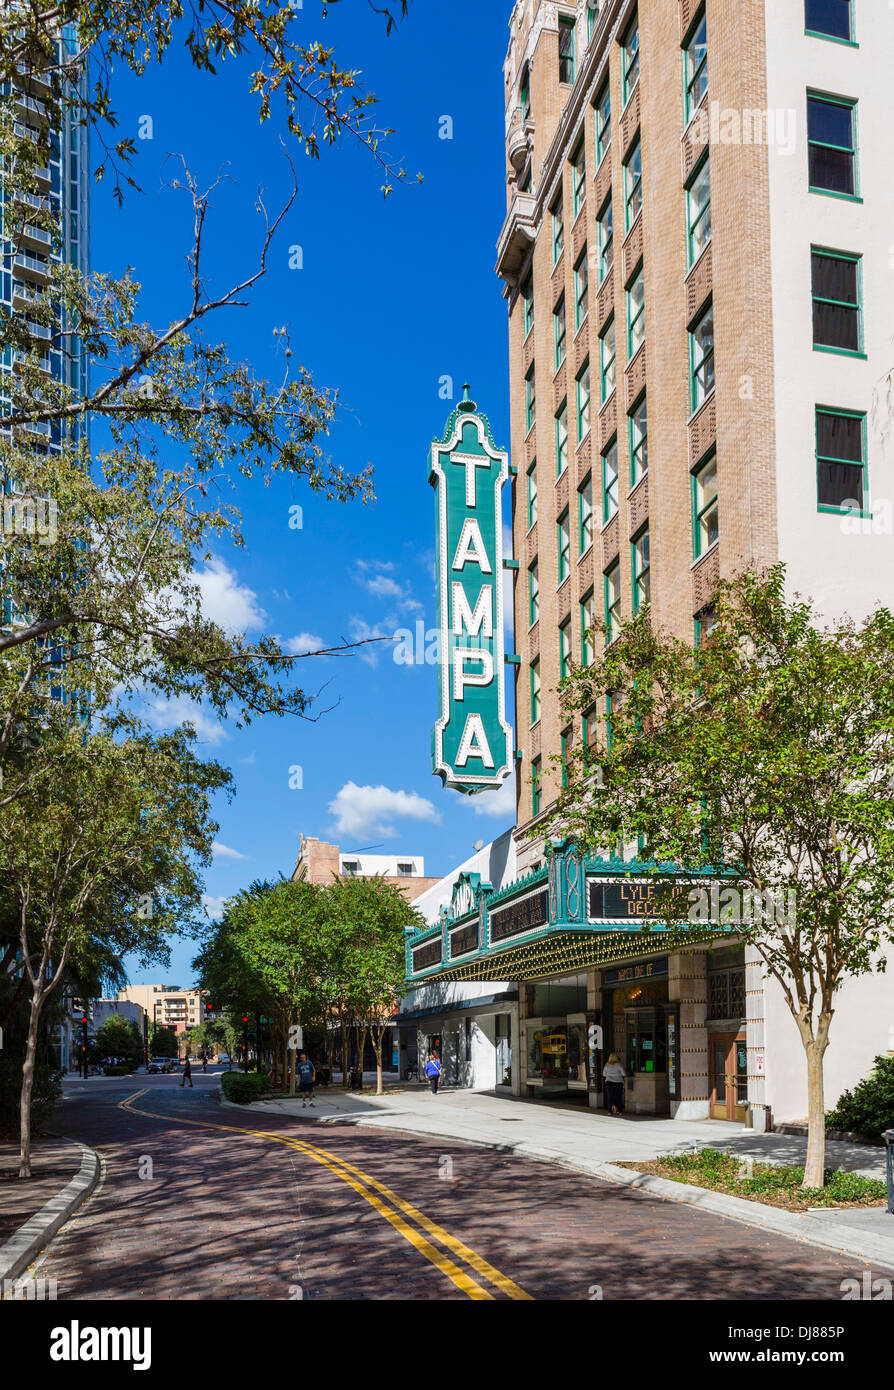 The historic Tampa Theater on Franklin Street in downtown Tampa, Florida, USA Stock Photo